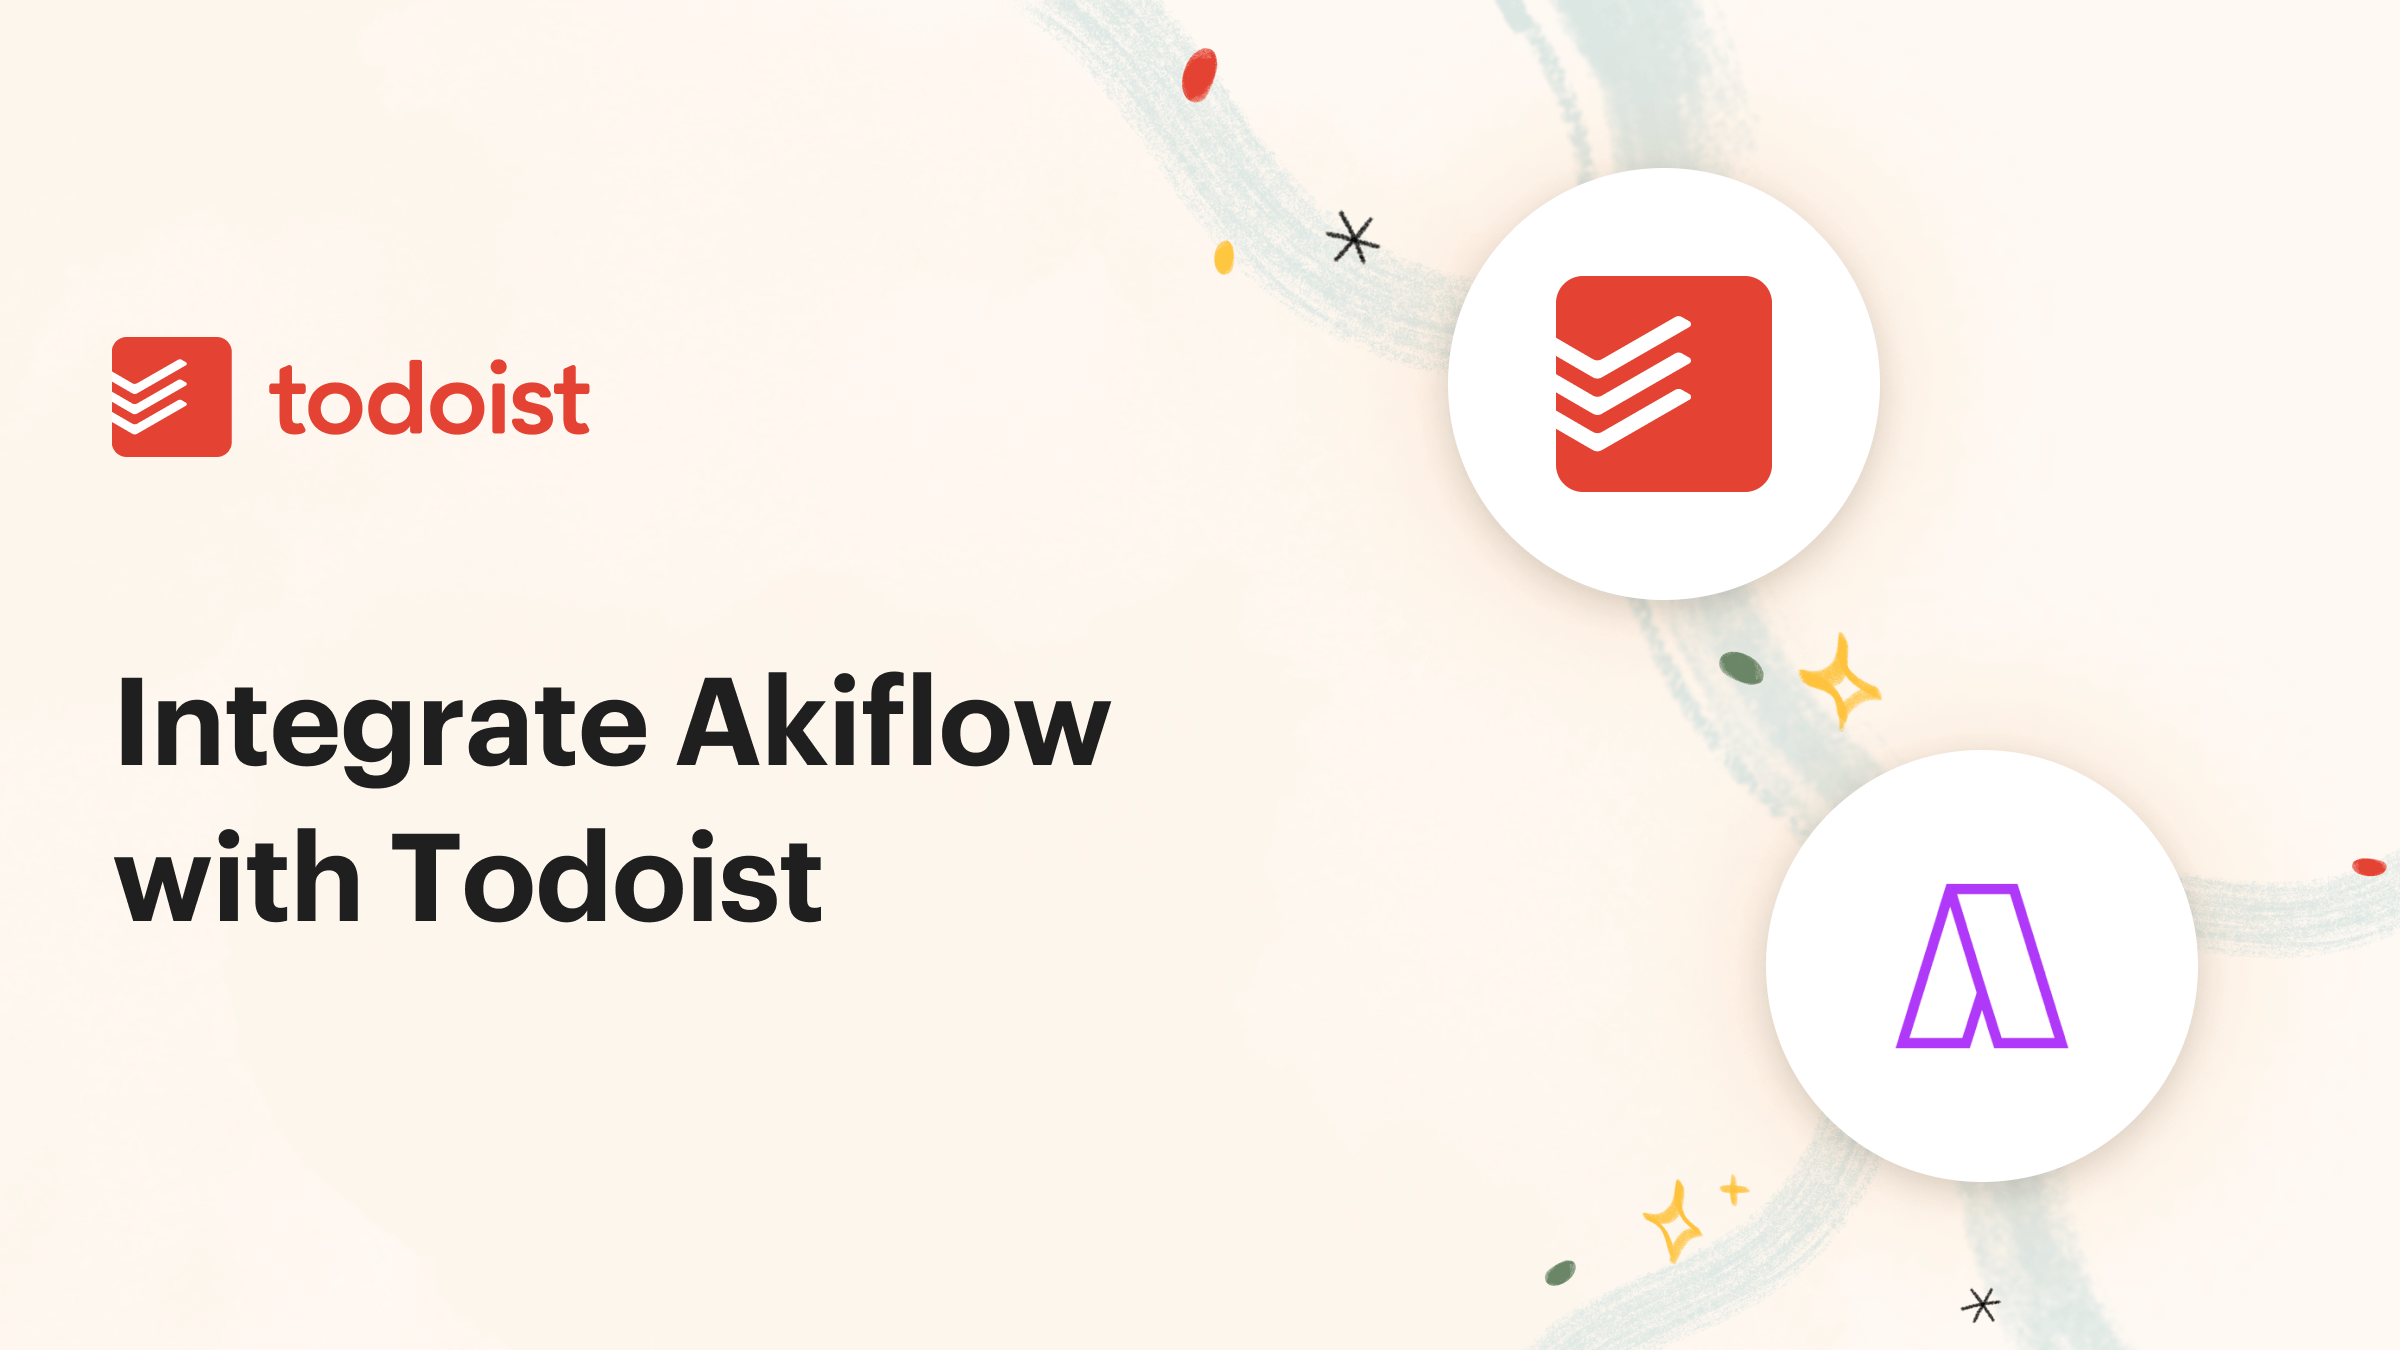 Akiflow and Todoist